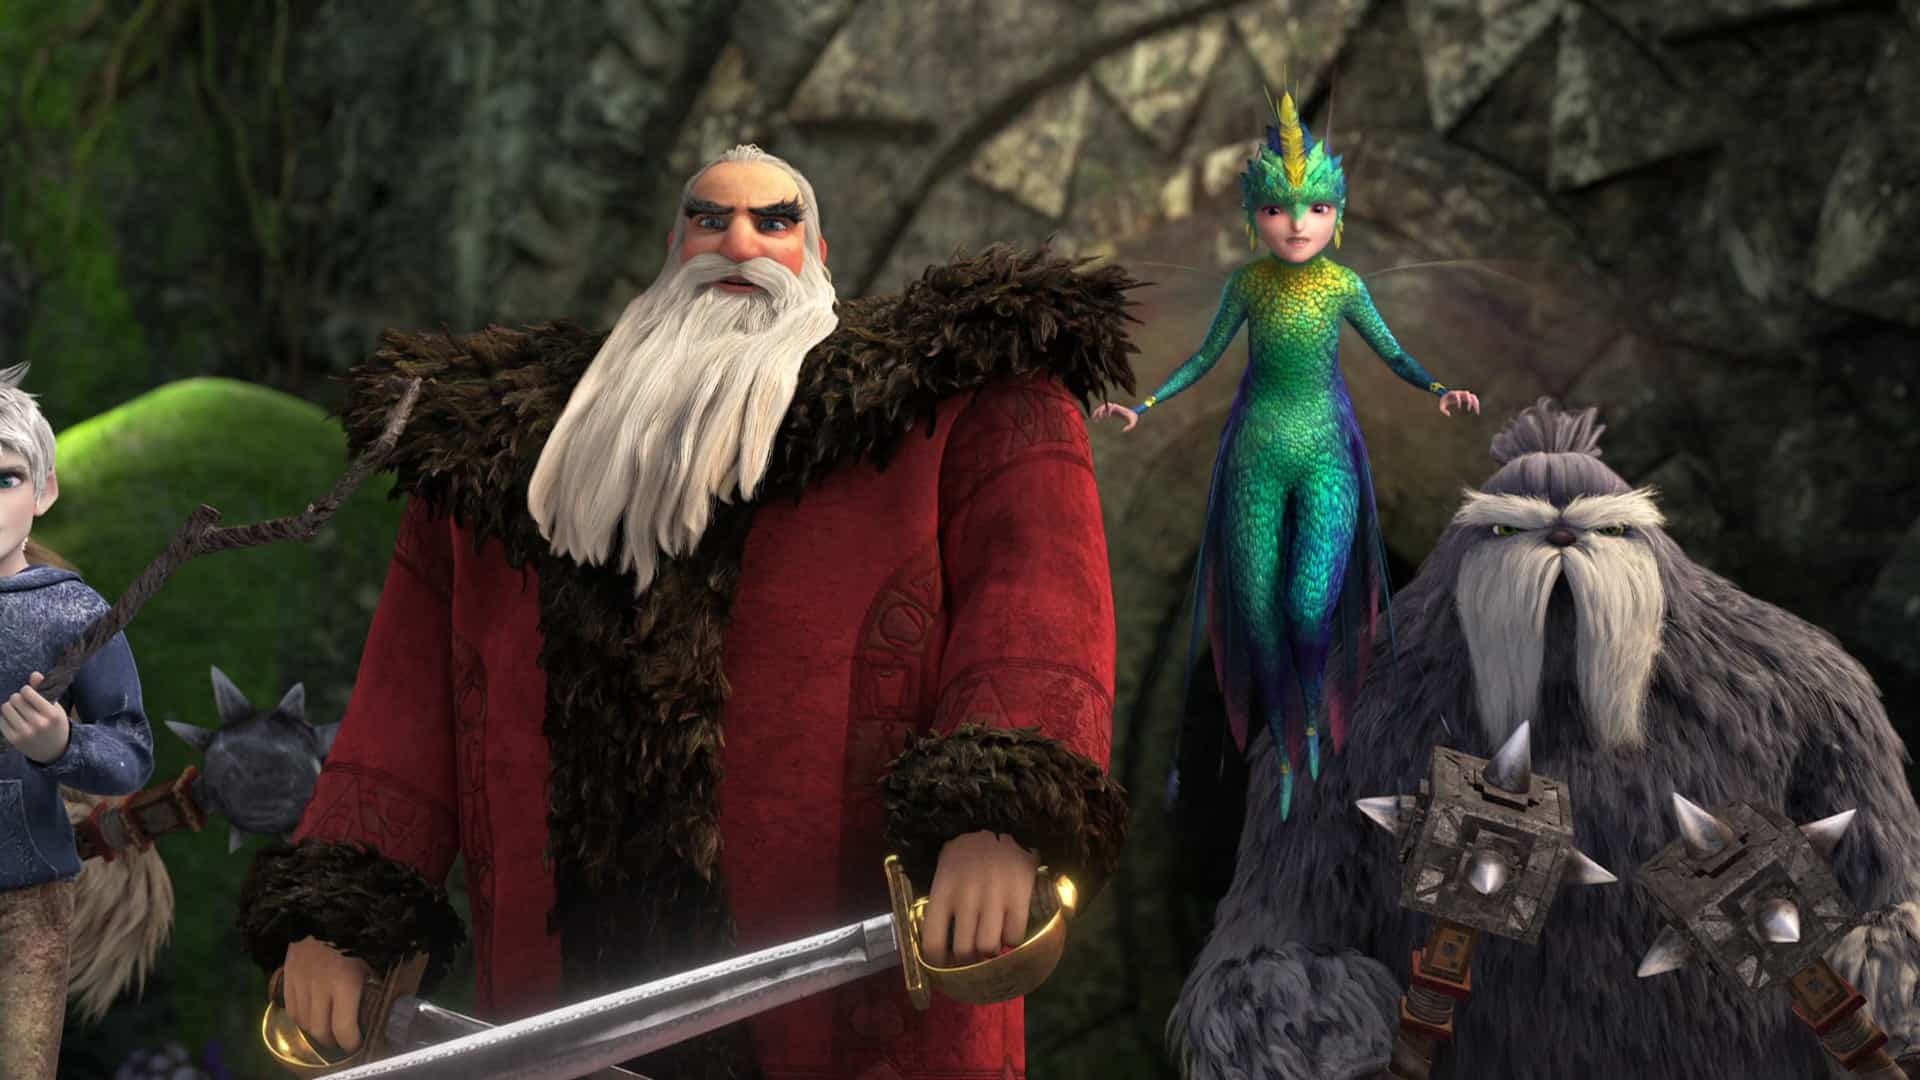 Animated magical guardians stand ready for action in this image from DreamWorks Animation.